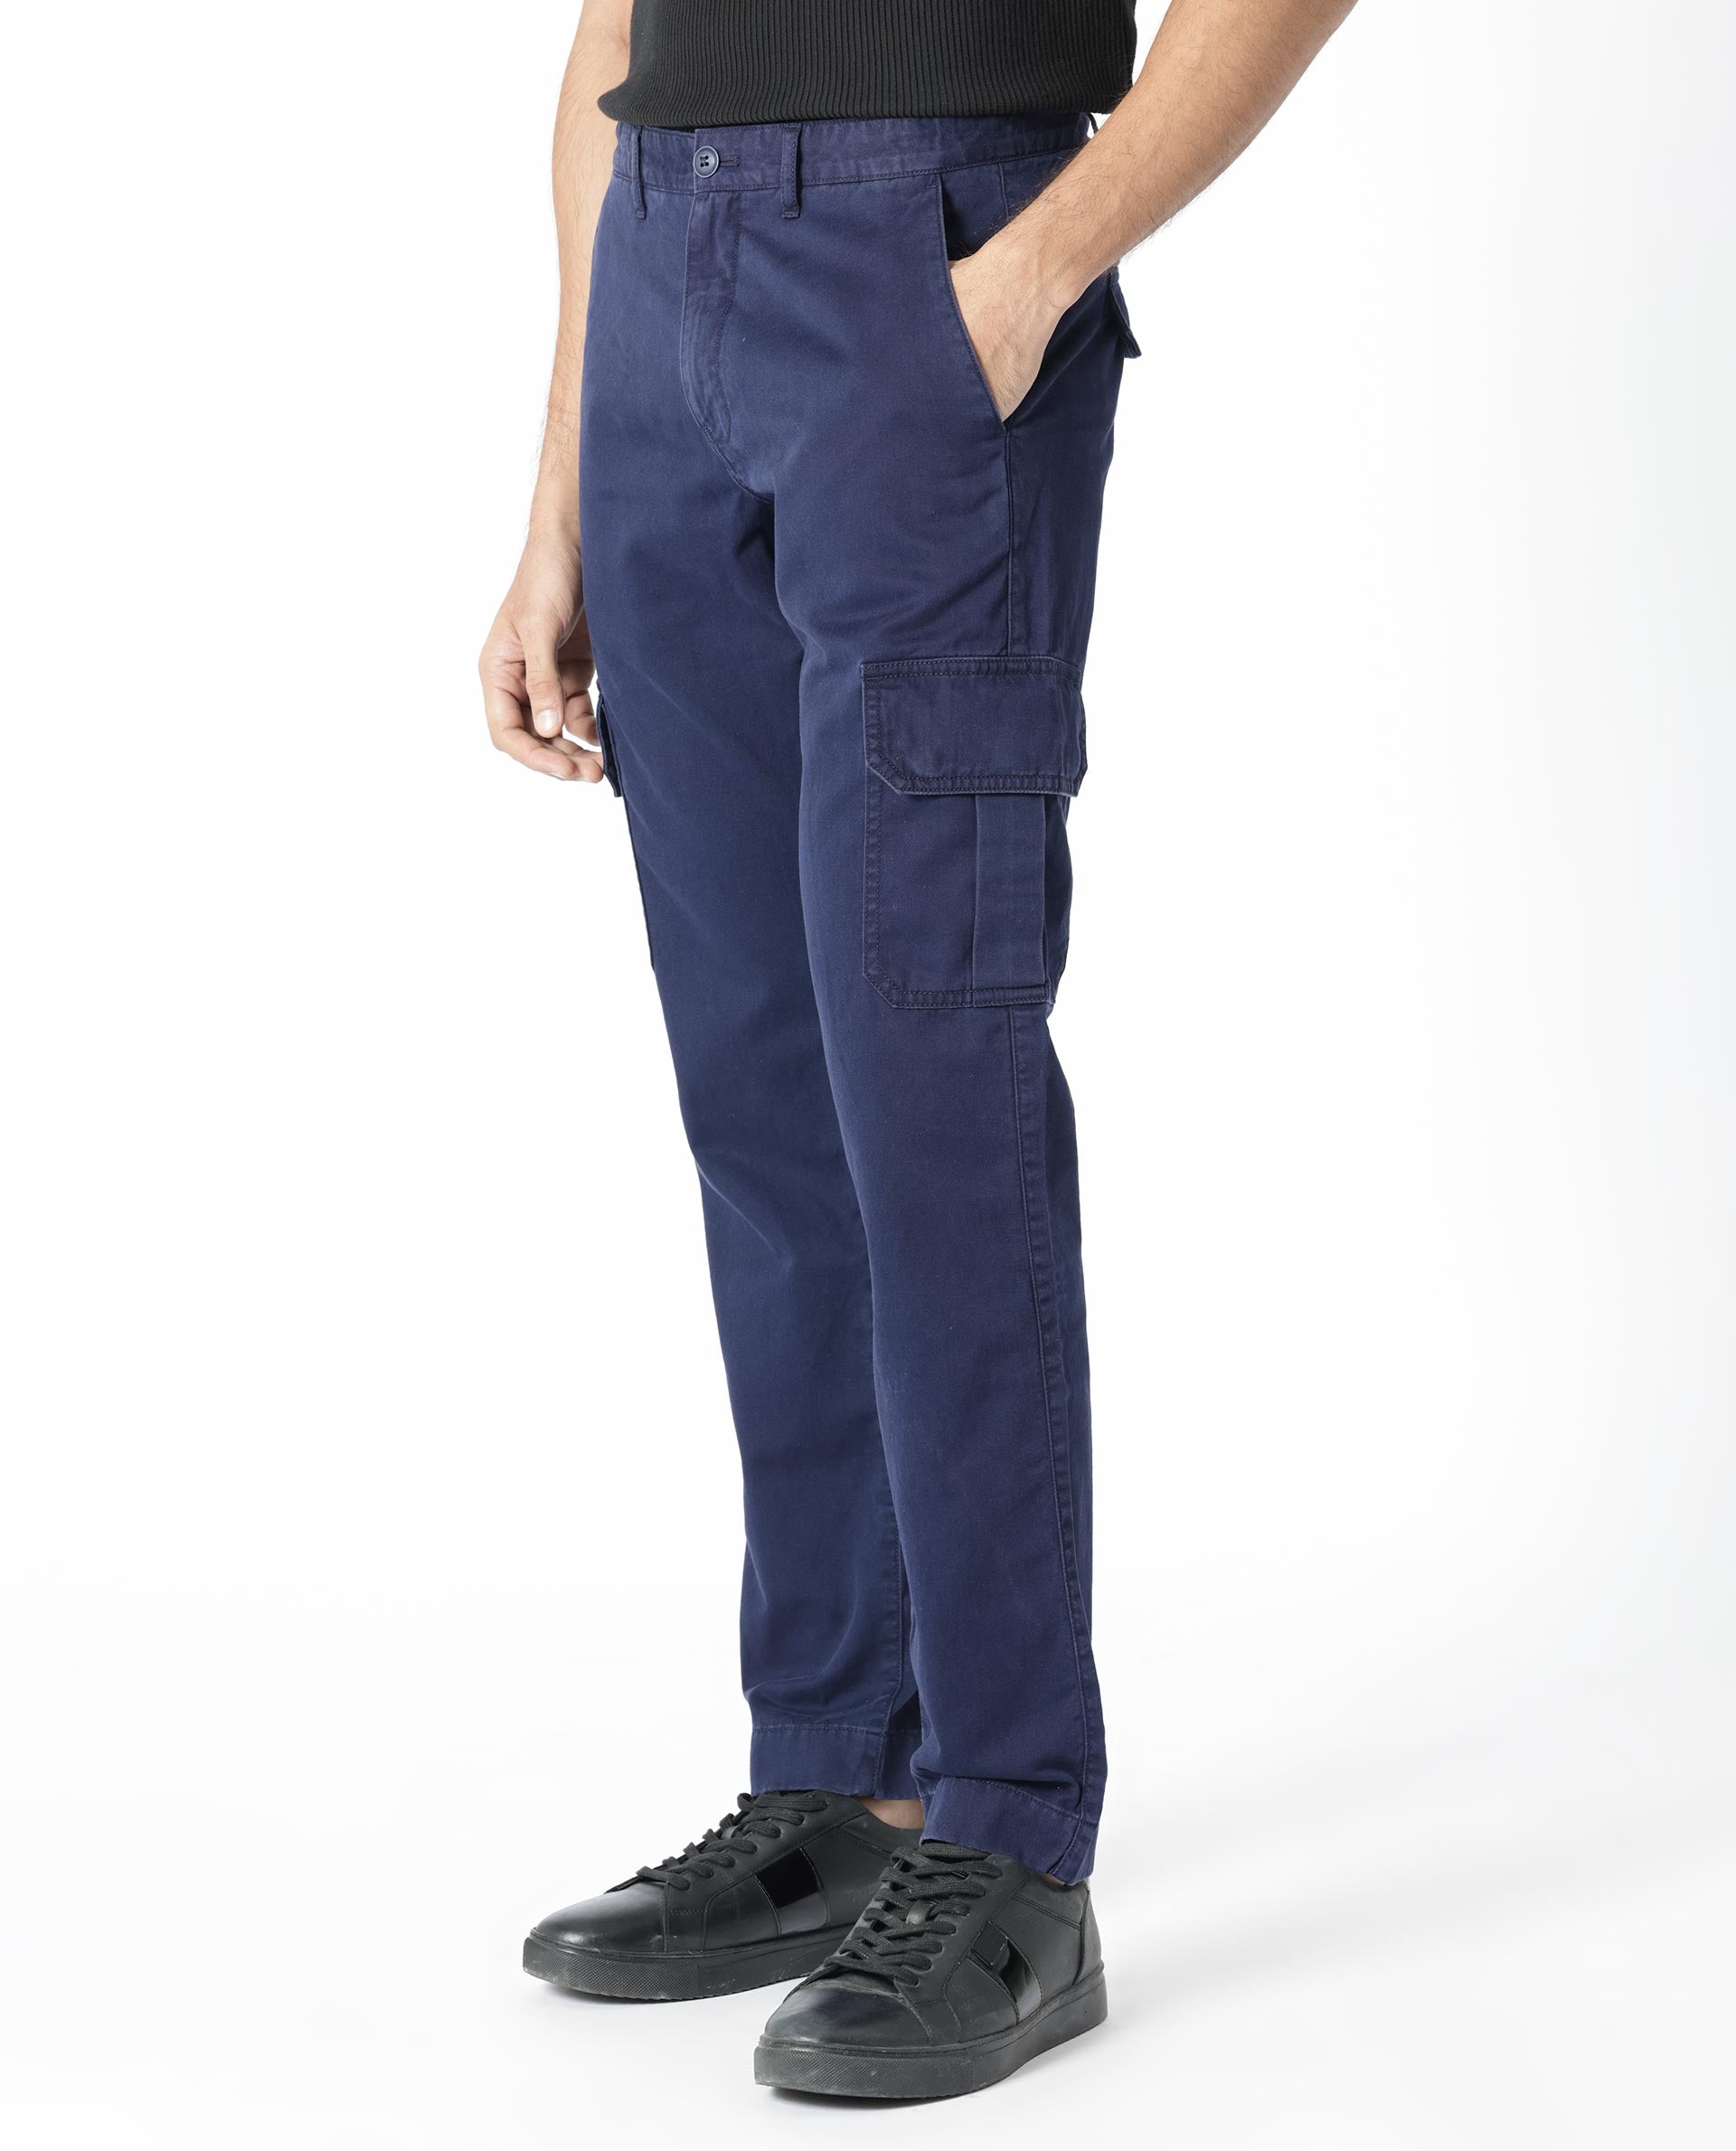 Stylish straight fit Cargo pant for women/girls